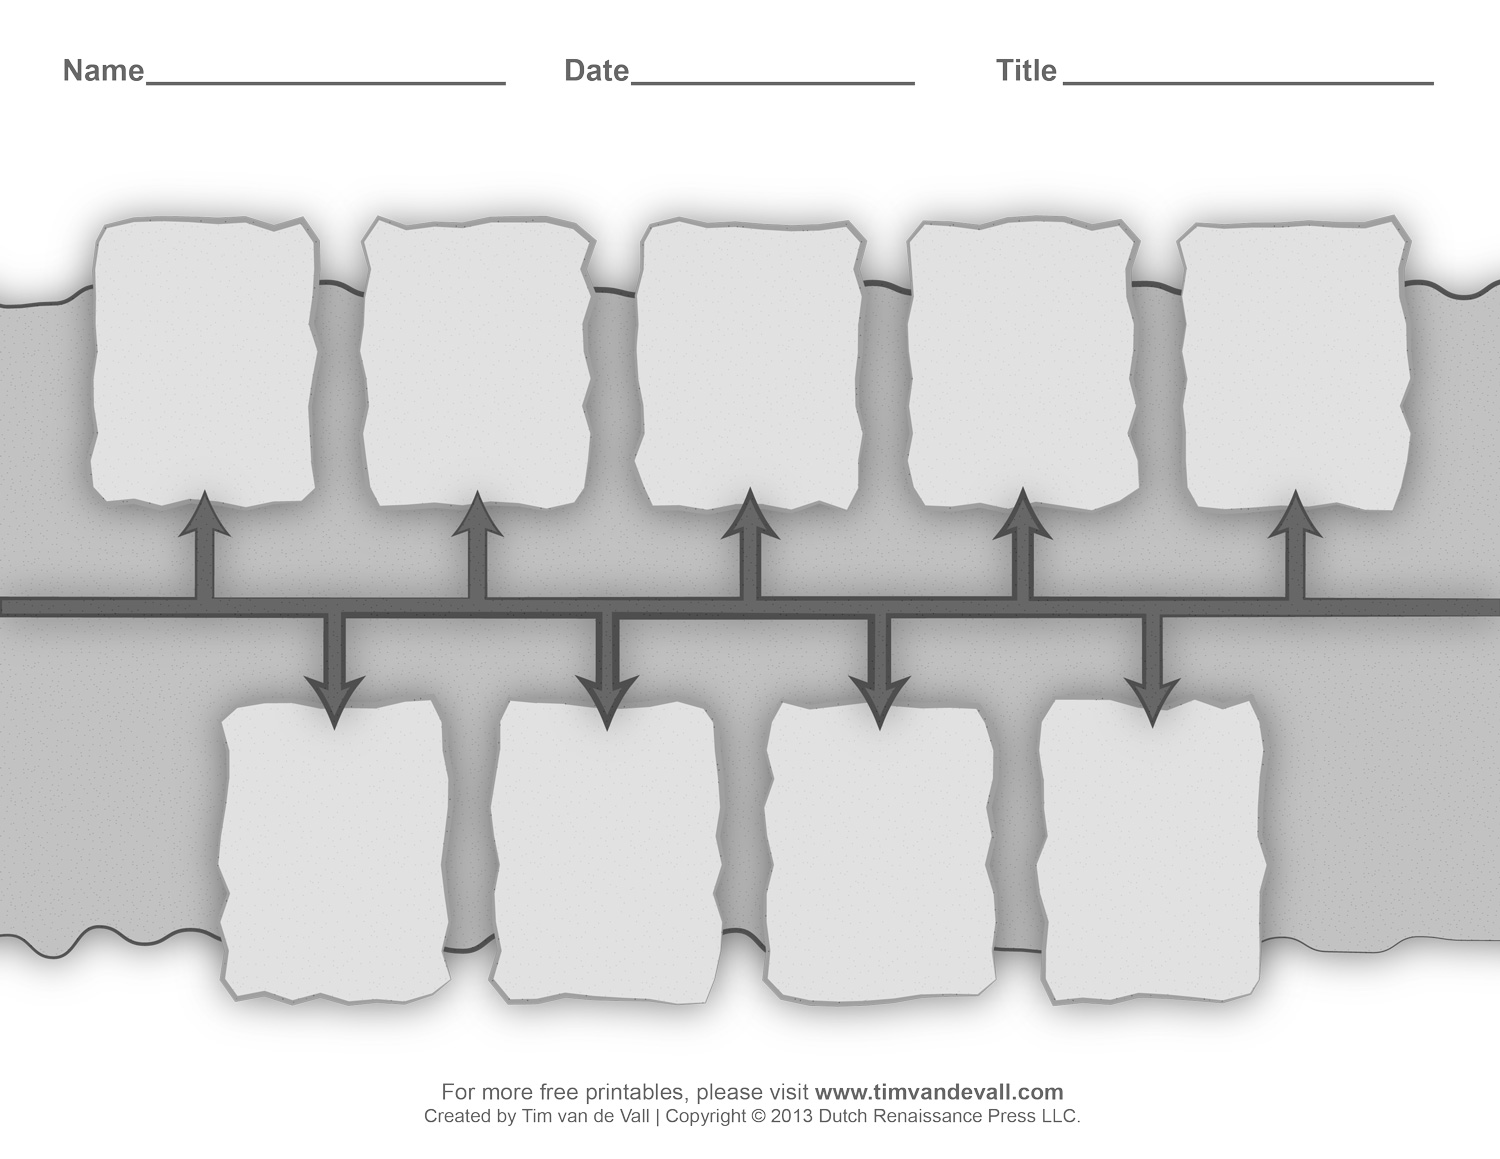 free-timeline-template-for-students-printable-templates